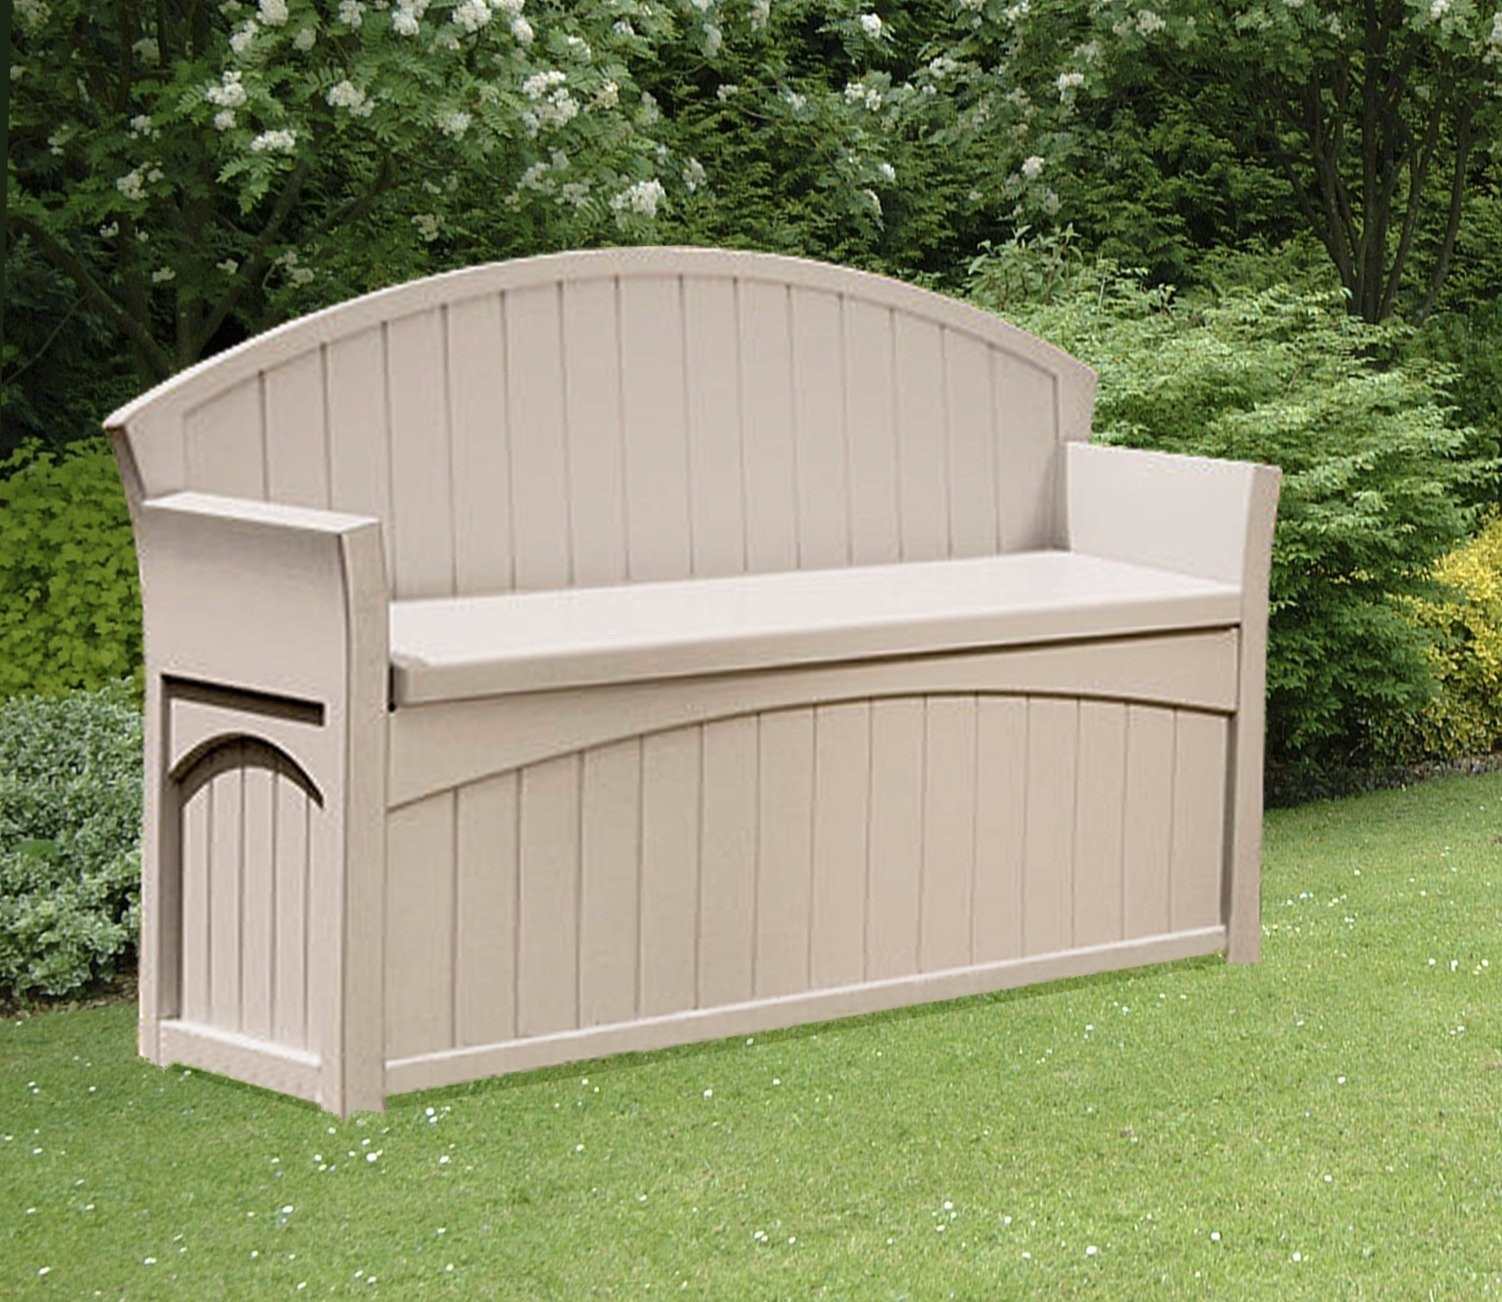 Outdoor Bench With Storage
 Suncast Patio Garden Outdoor Bench with 50 Gallon Storage